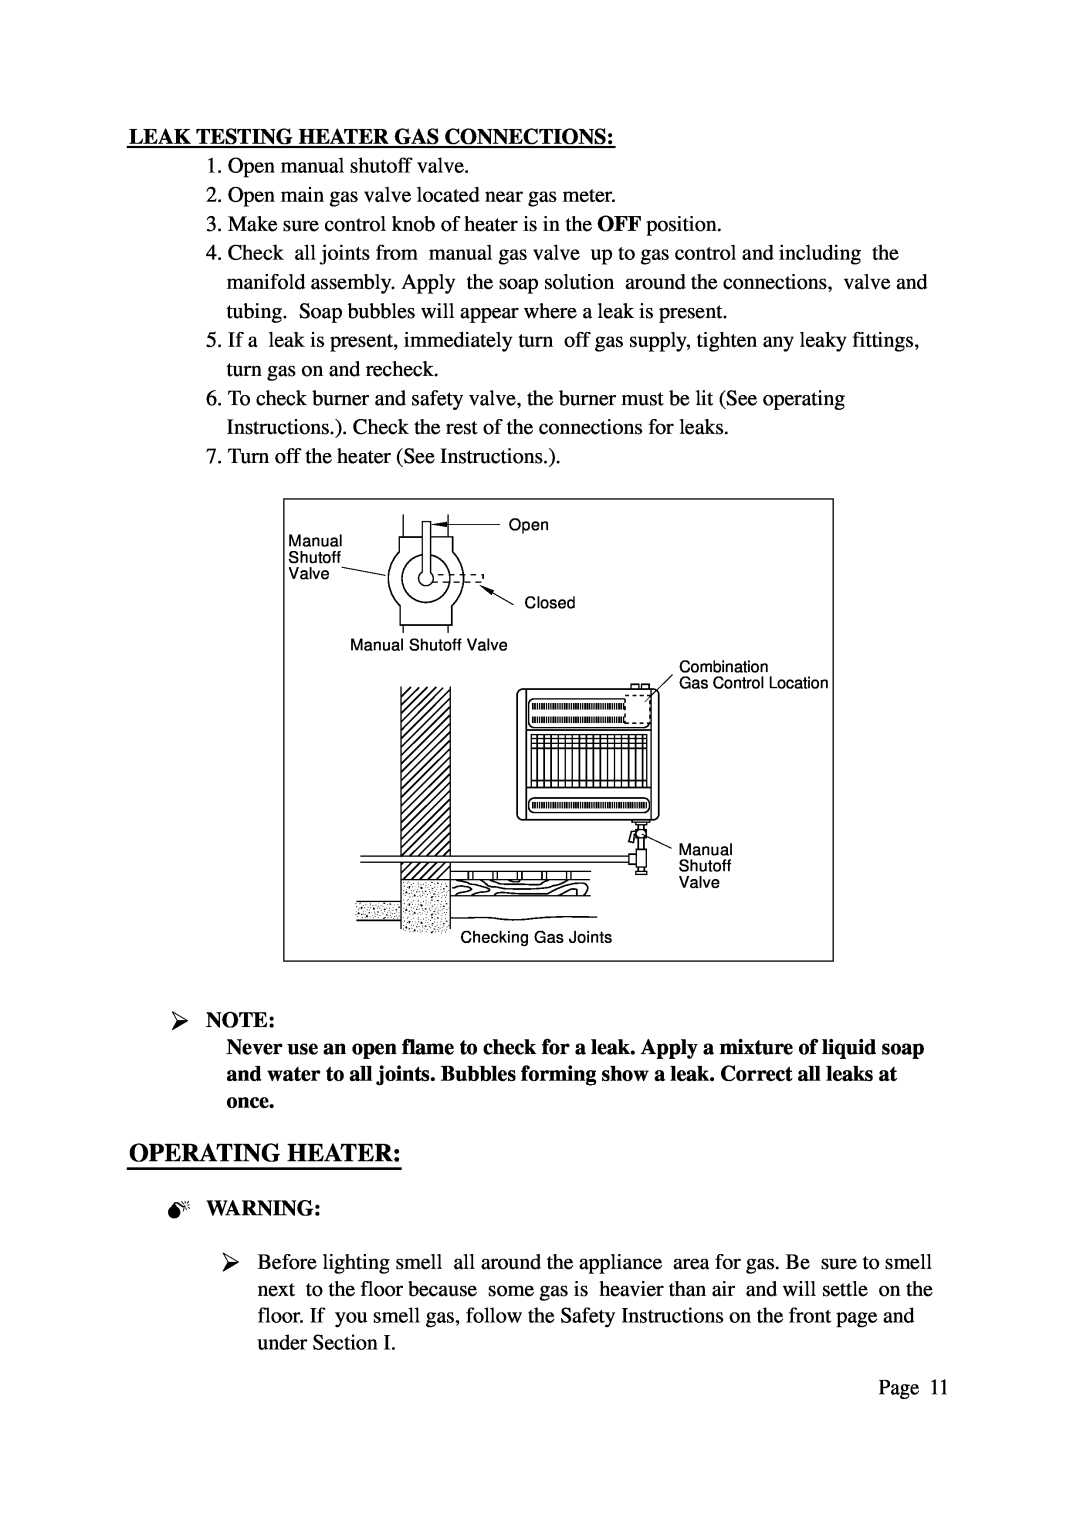 DreamGEAR P186, P314, N313, N185 installation manual Operating Heater, Leak Testing Heater Gas Connections 